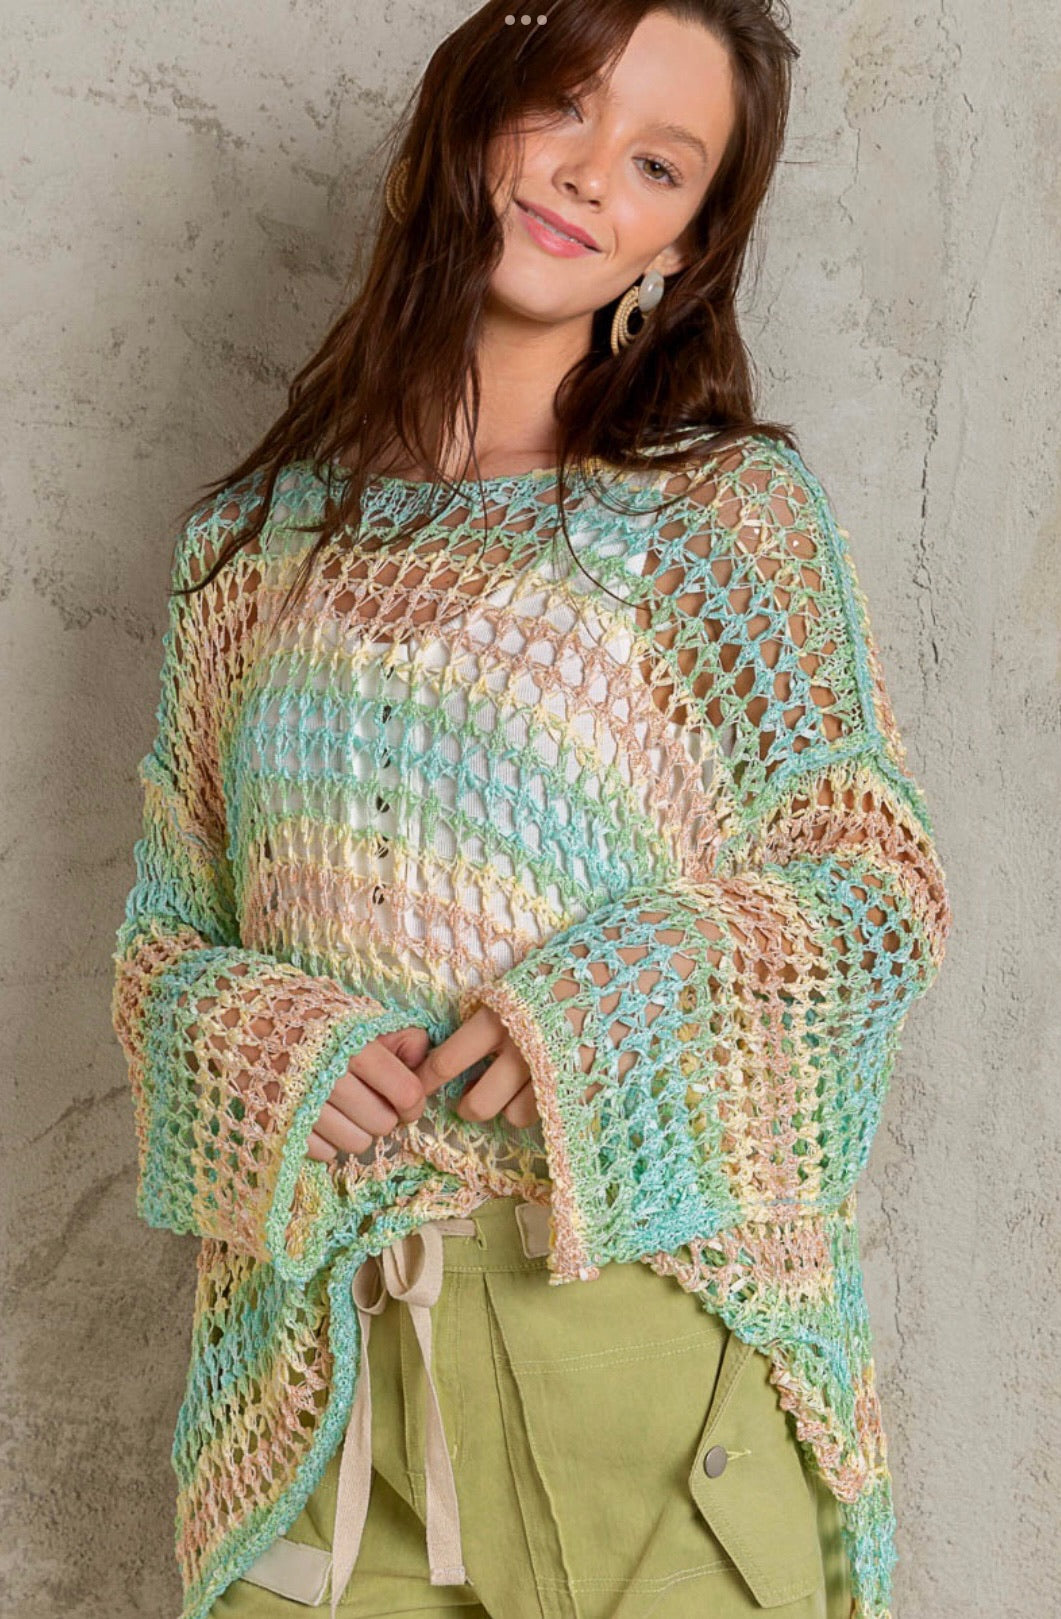 Tropical Twist Stripped Open Knit Slouchy Fishermans Sweater